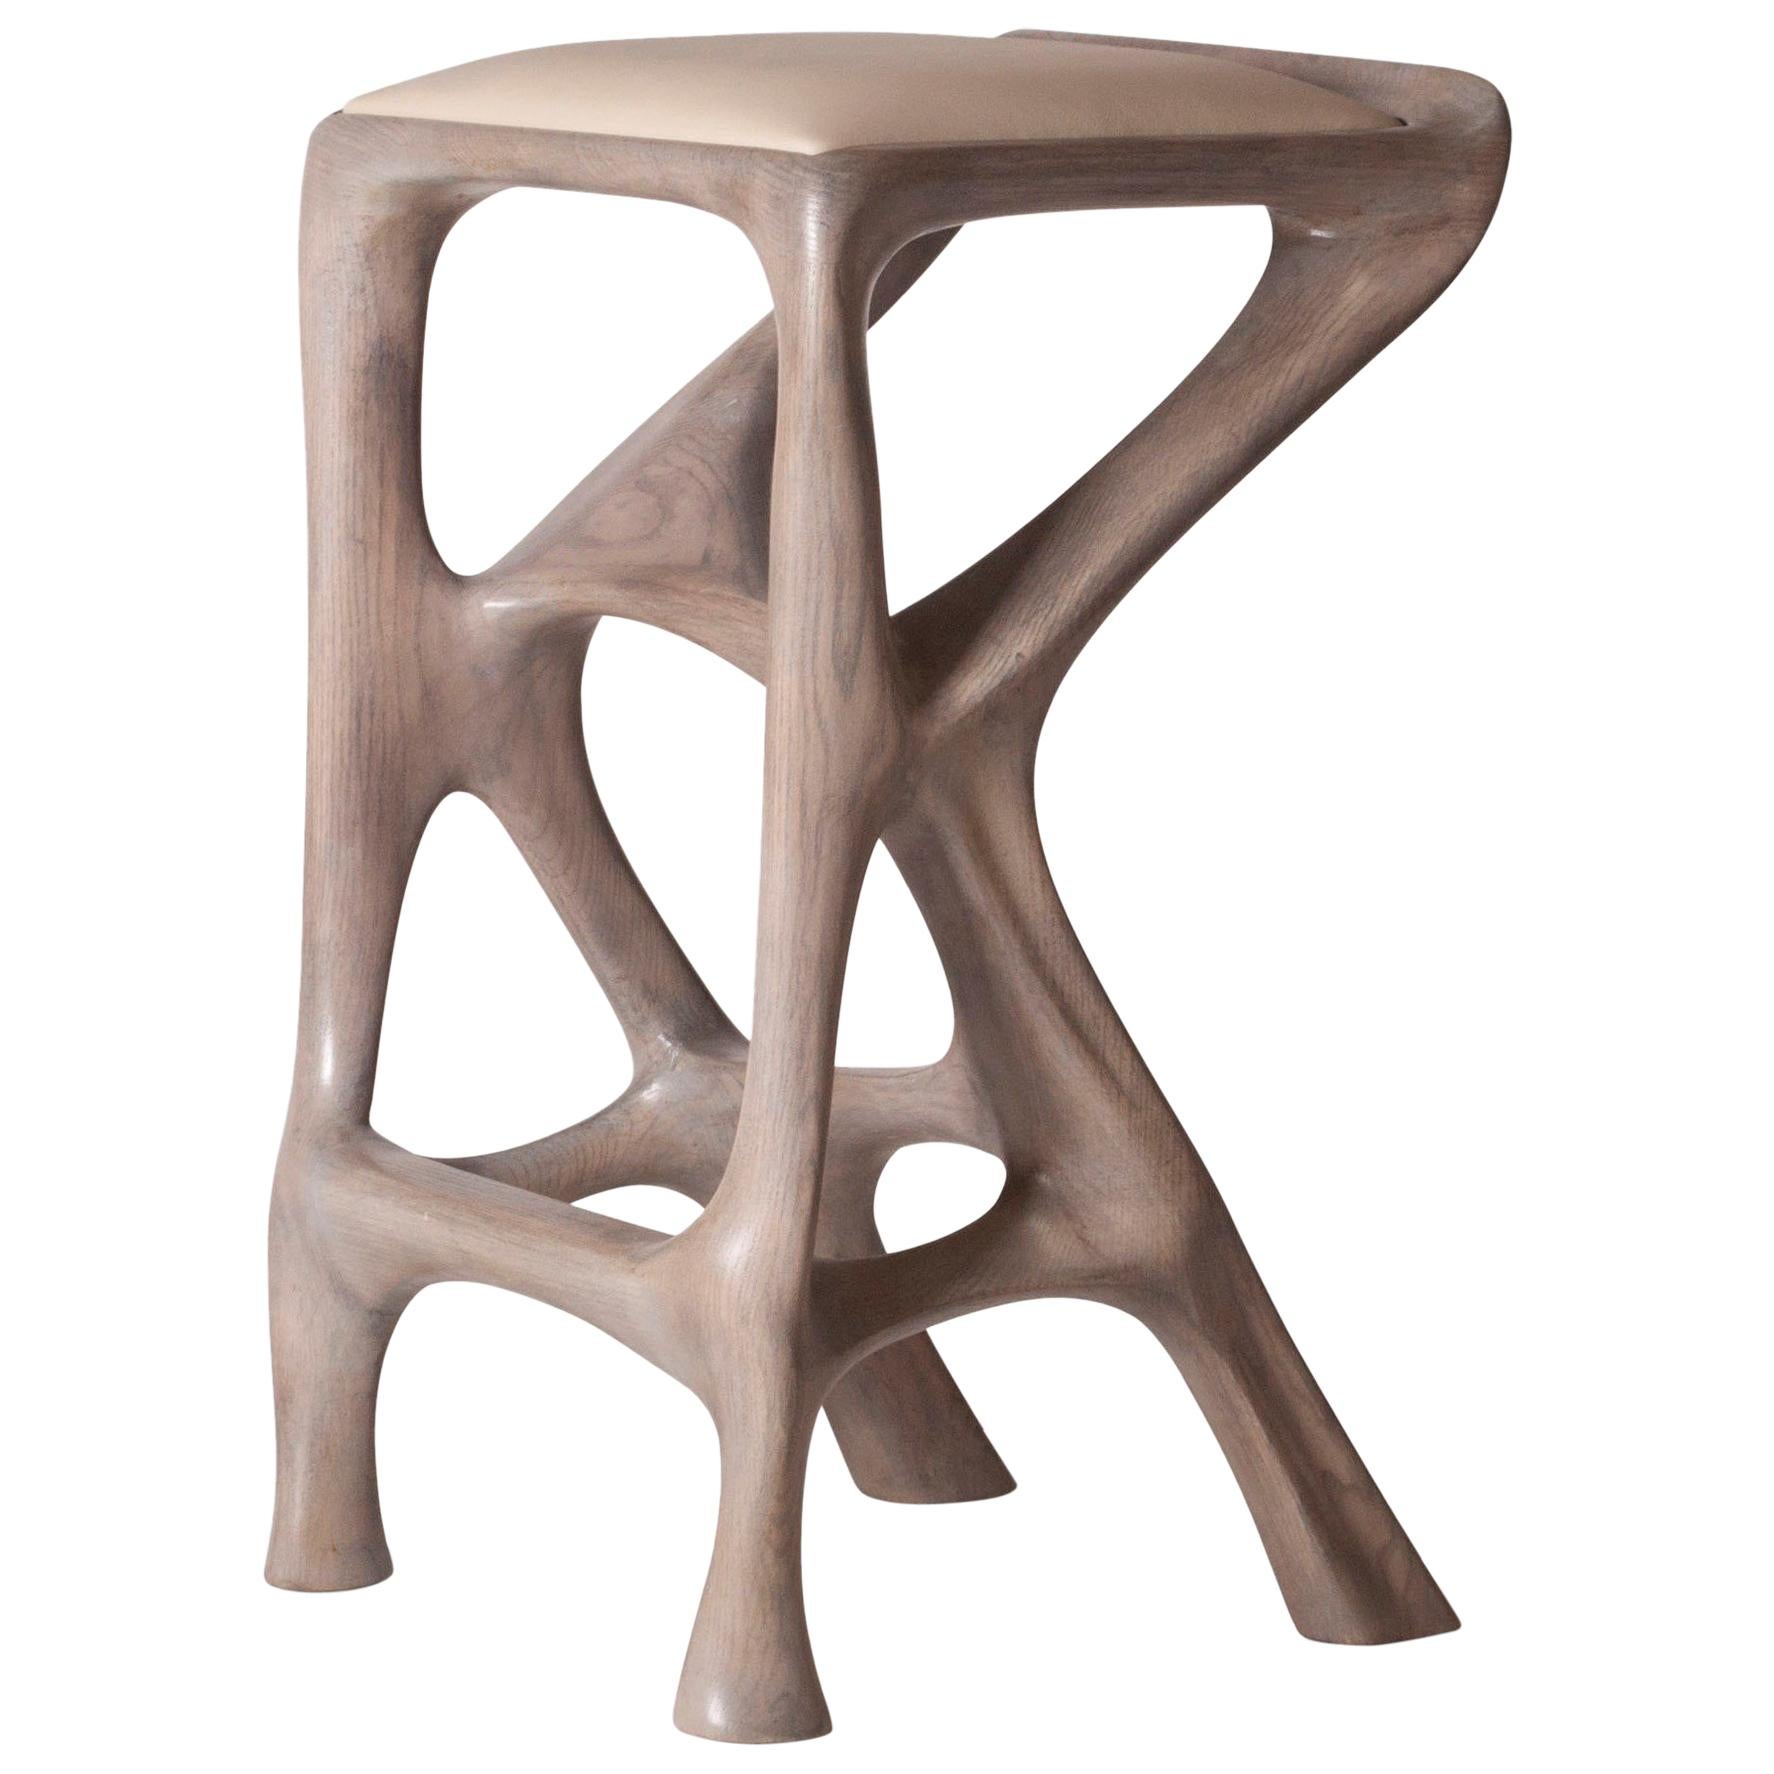 Amorph Chimera Bar Stool in Gray Oak stain on Ash wood counter height For Sale